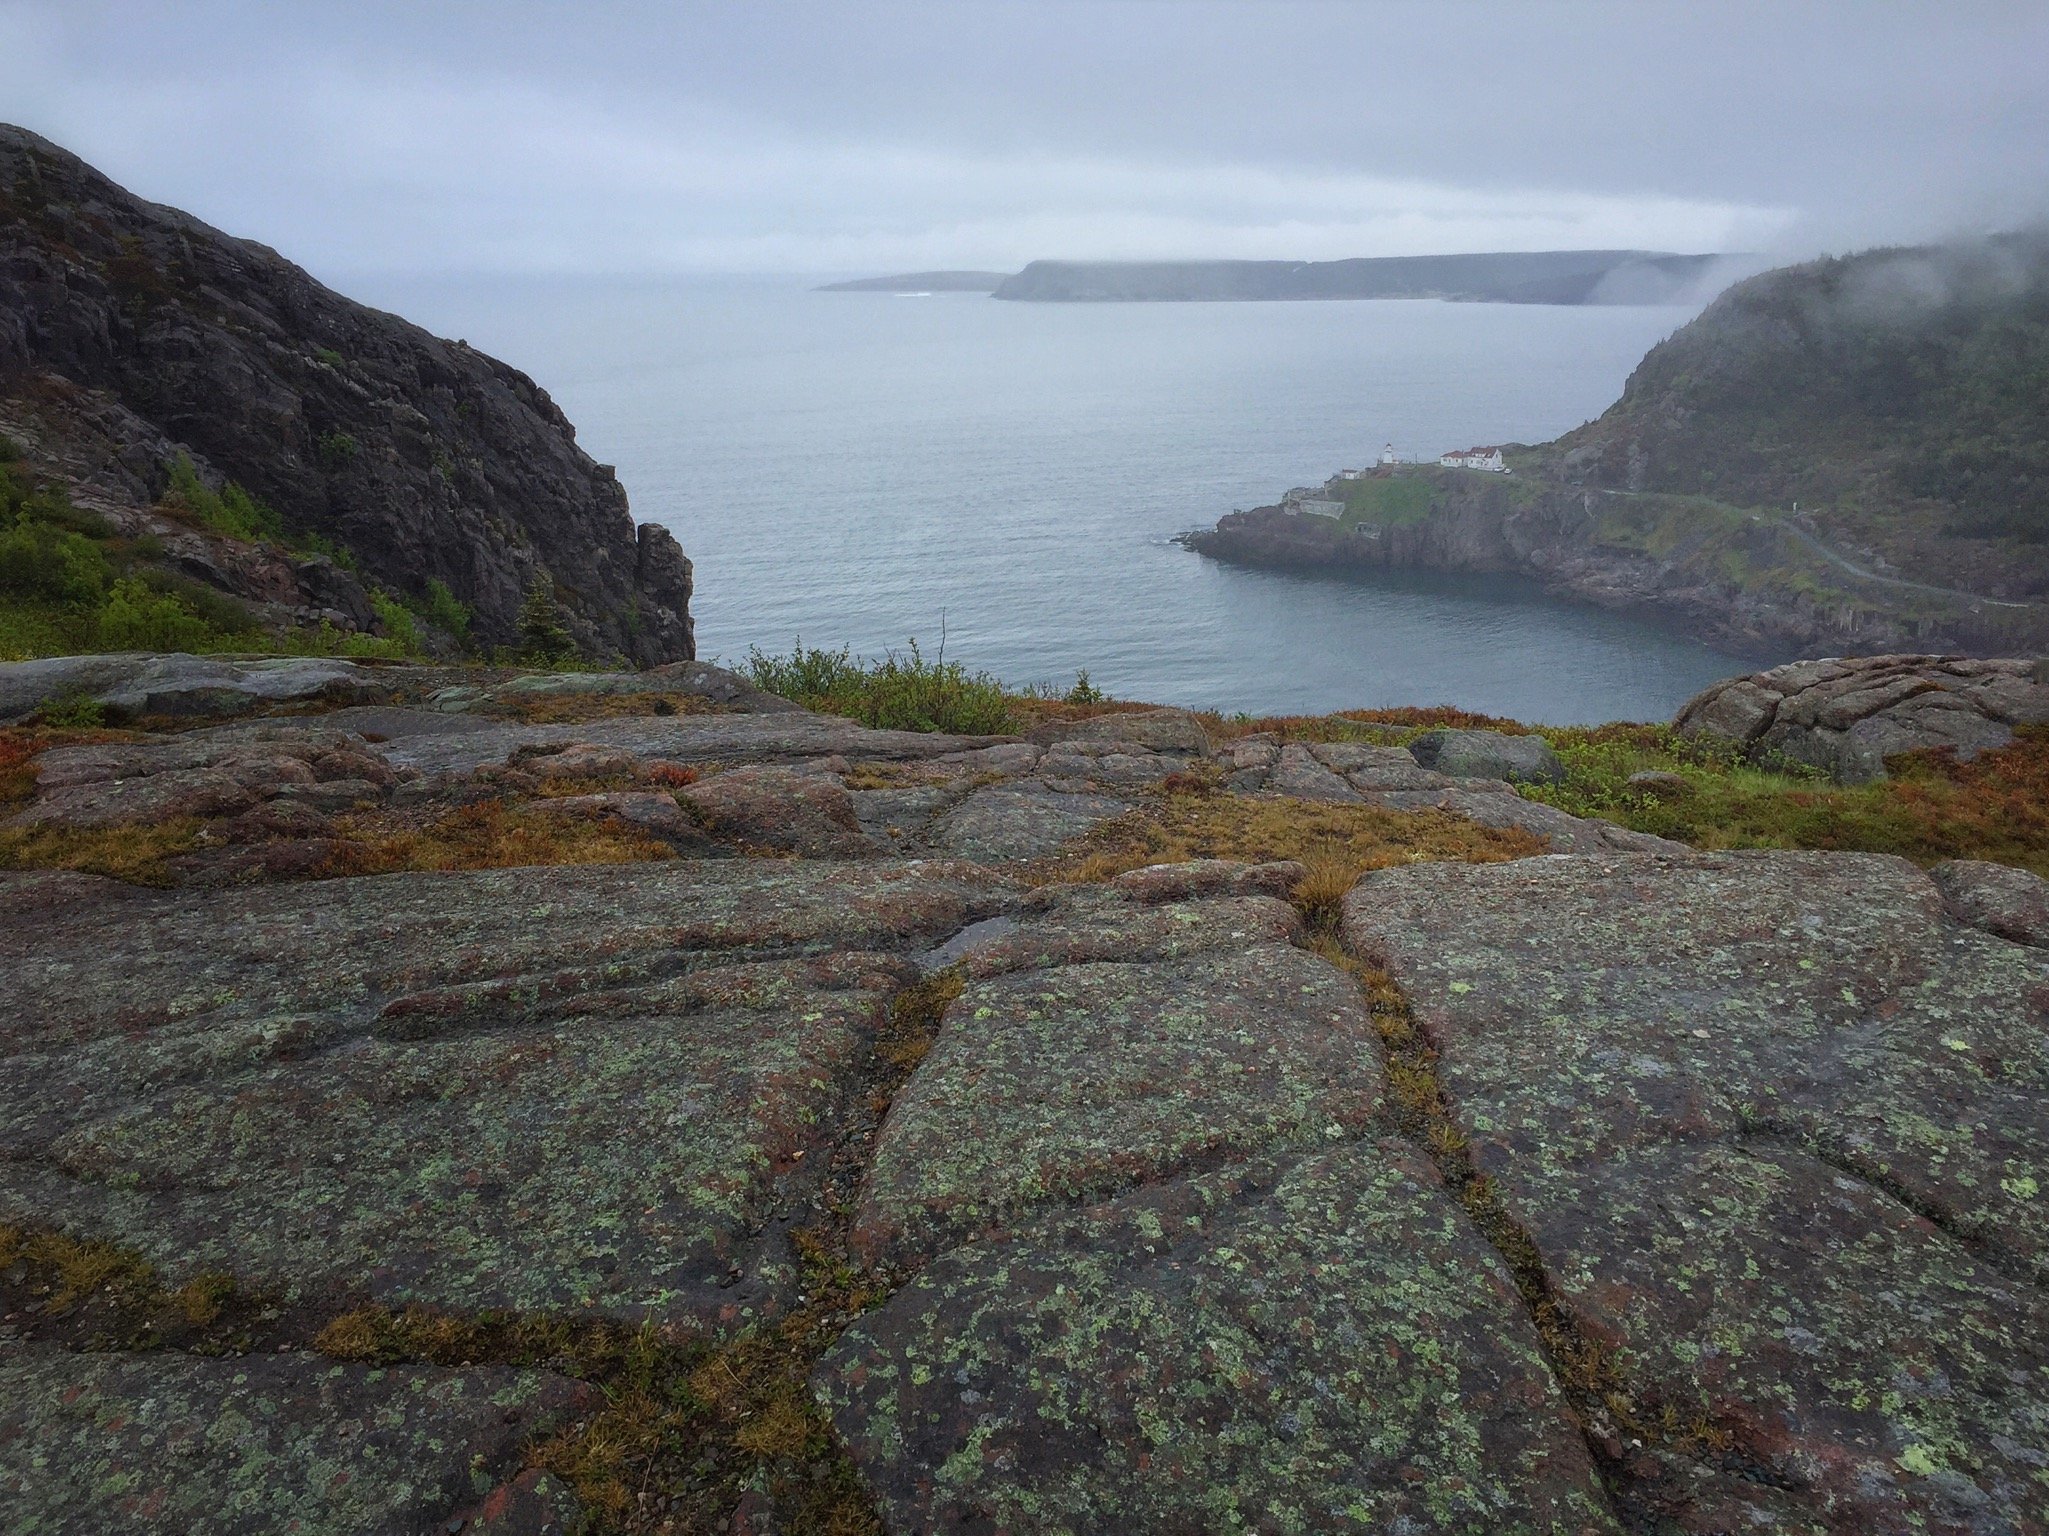 The Mouth of St. John's Harbour with Fort Amherst 